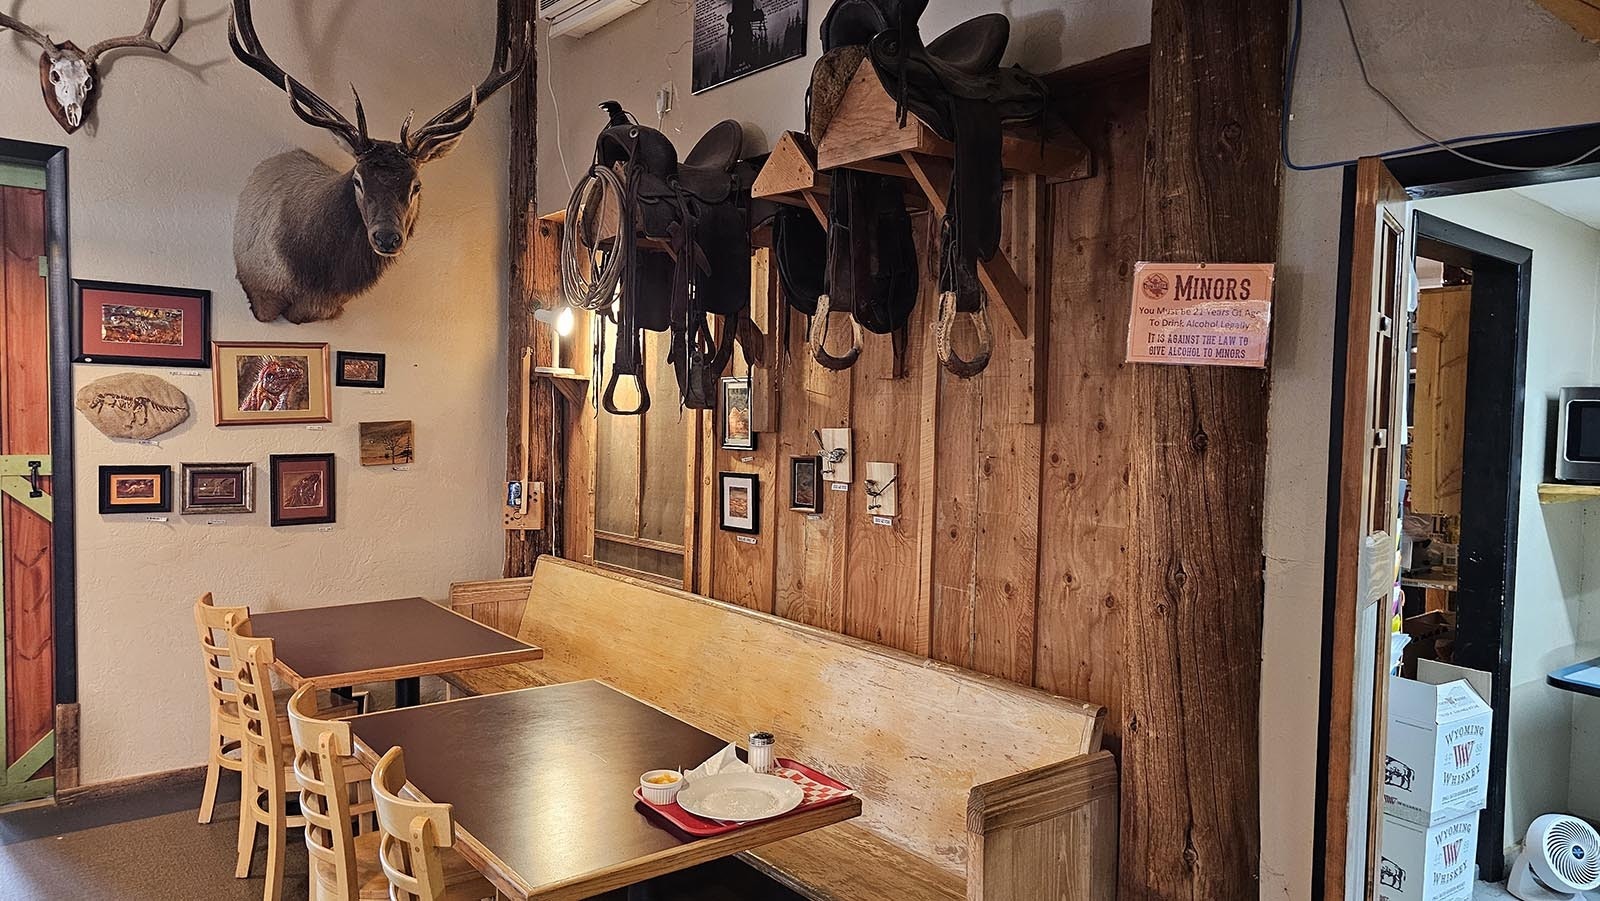 Saddles, trophies, and other memorabilia decorate the walls at Ten Sleep Brewery.